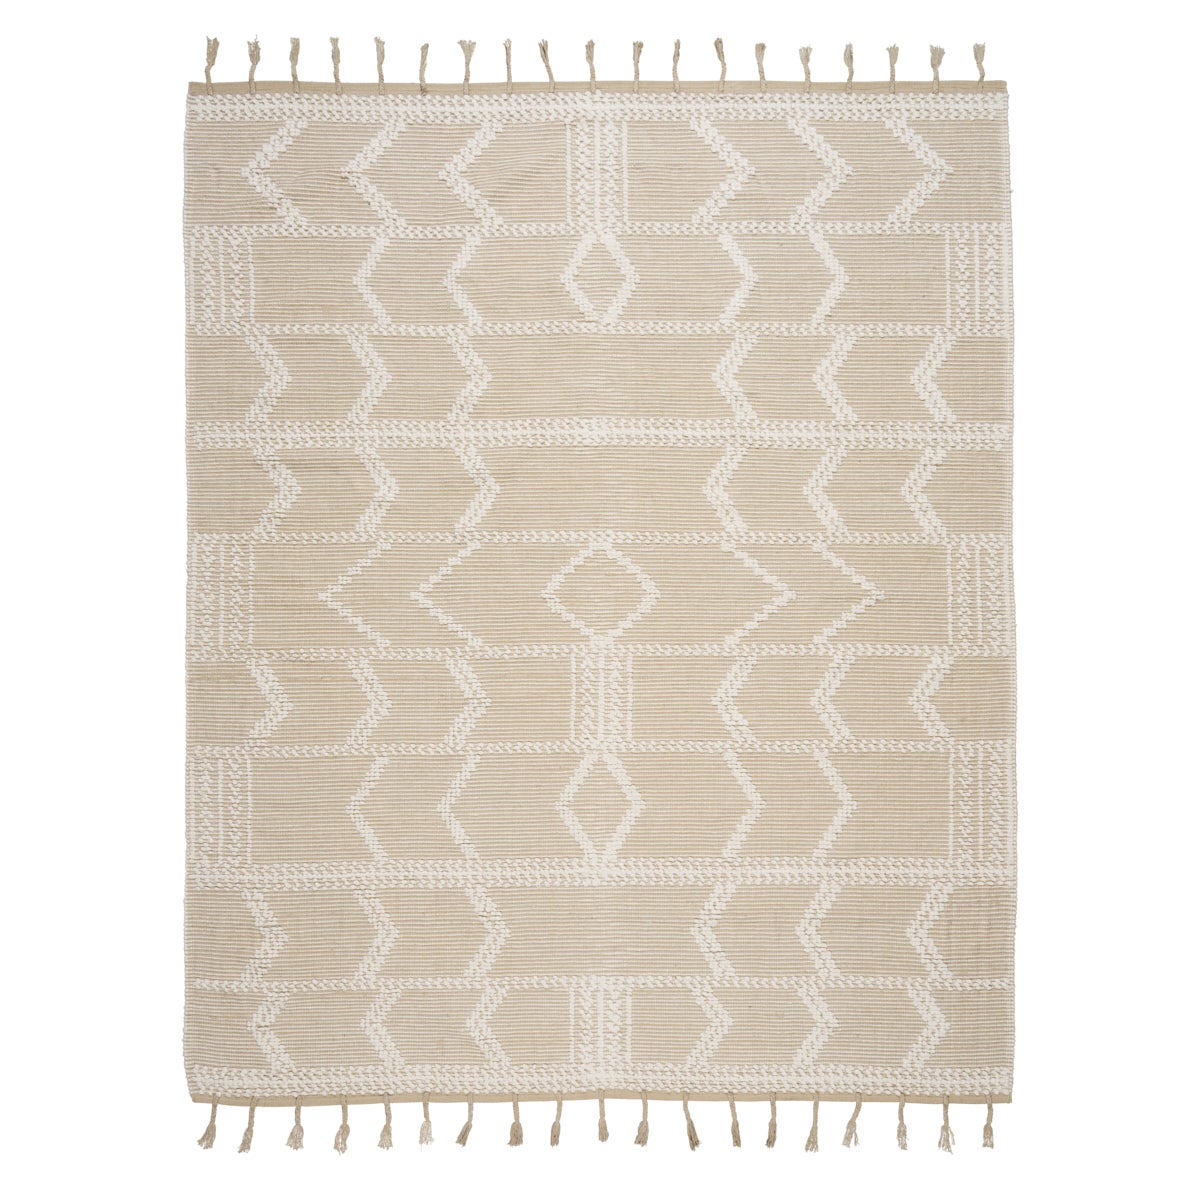 Schumacher Malta French Knots Rugs in Sand, 8x10' (en anglais)